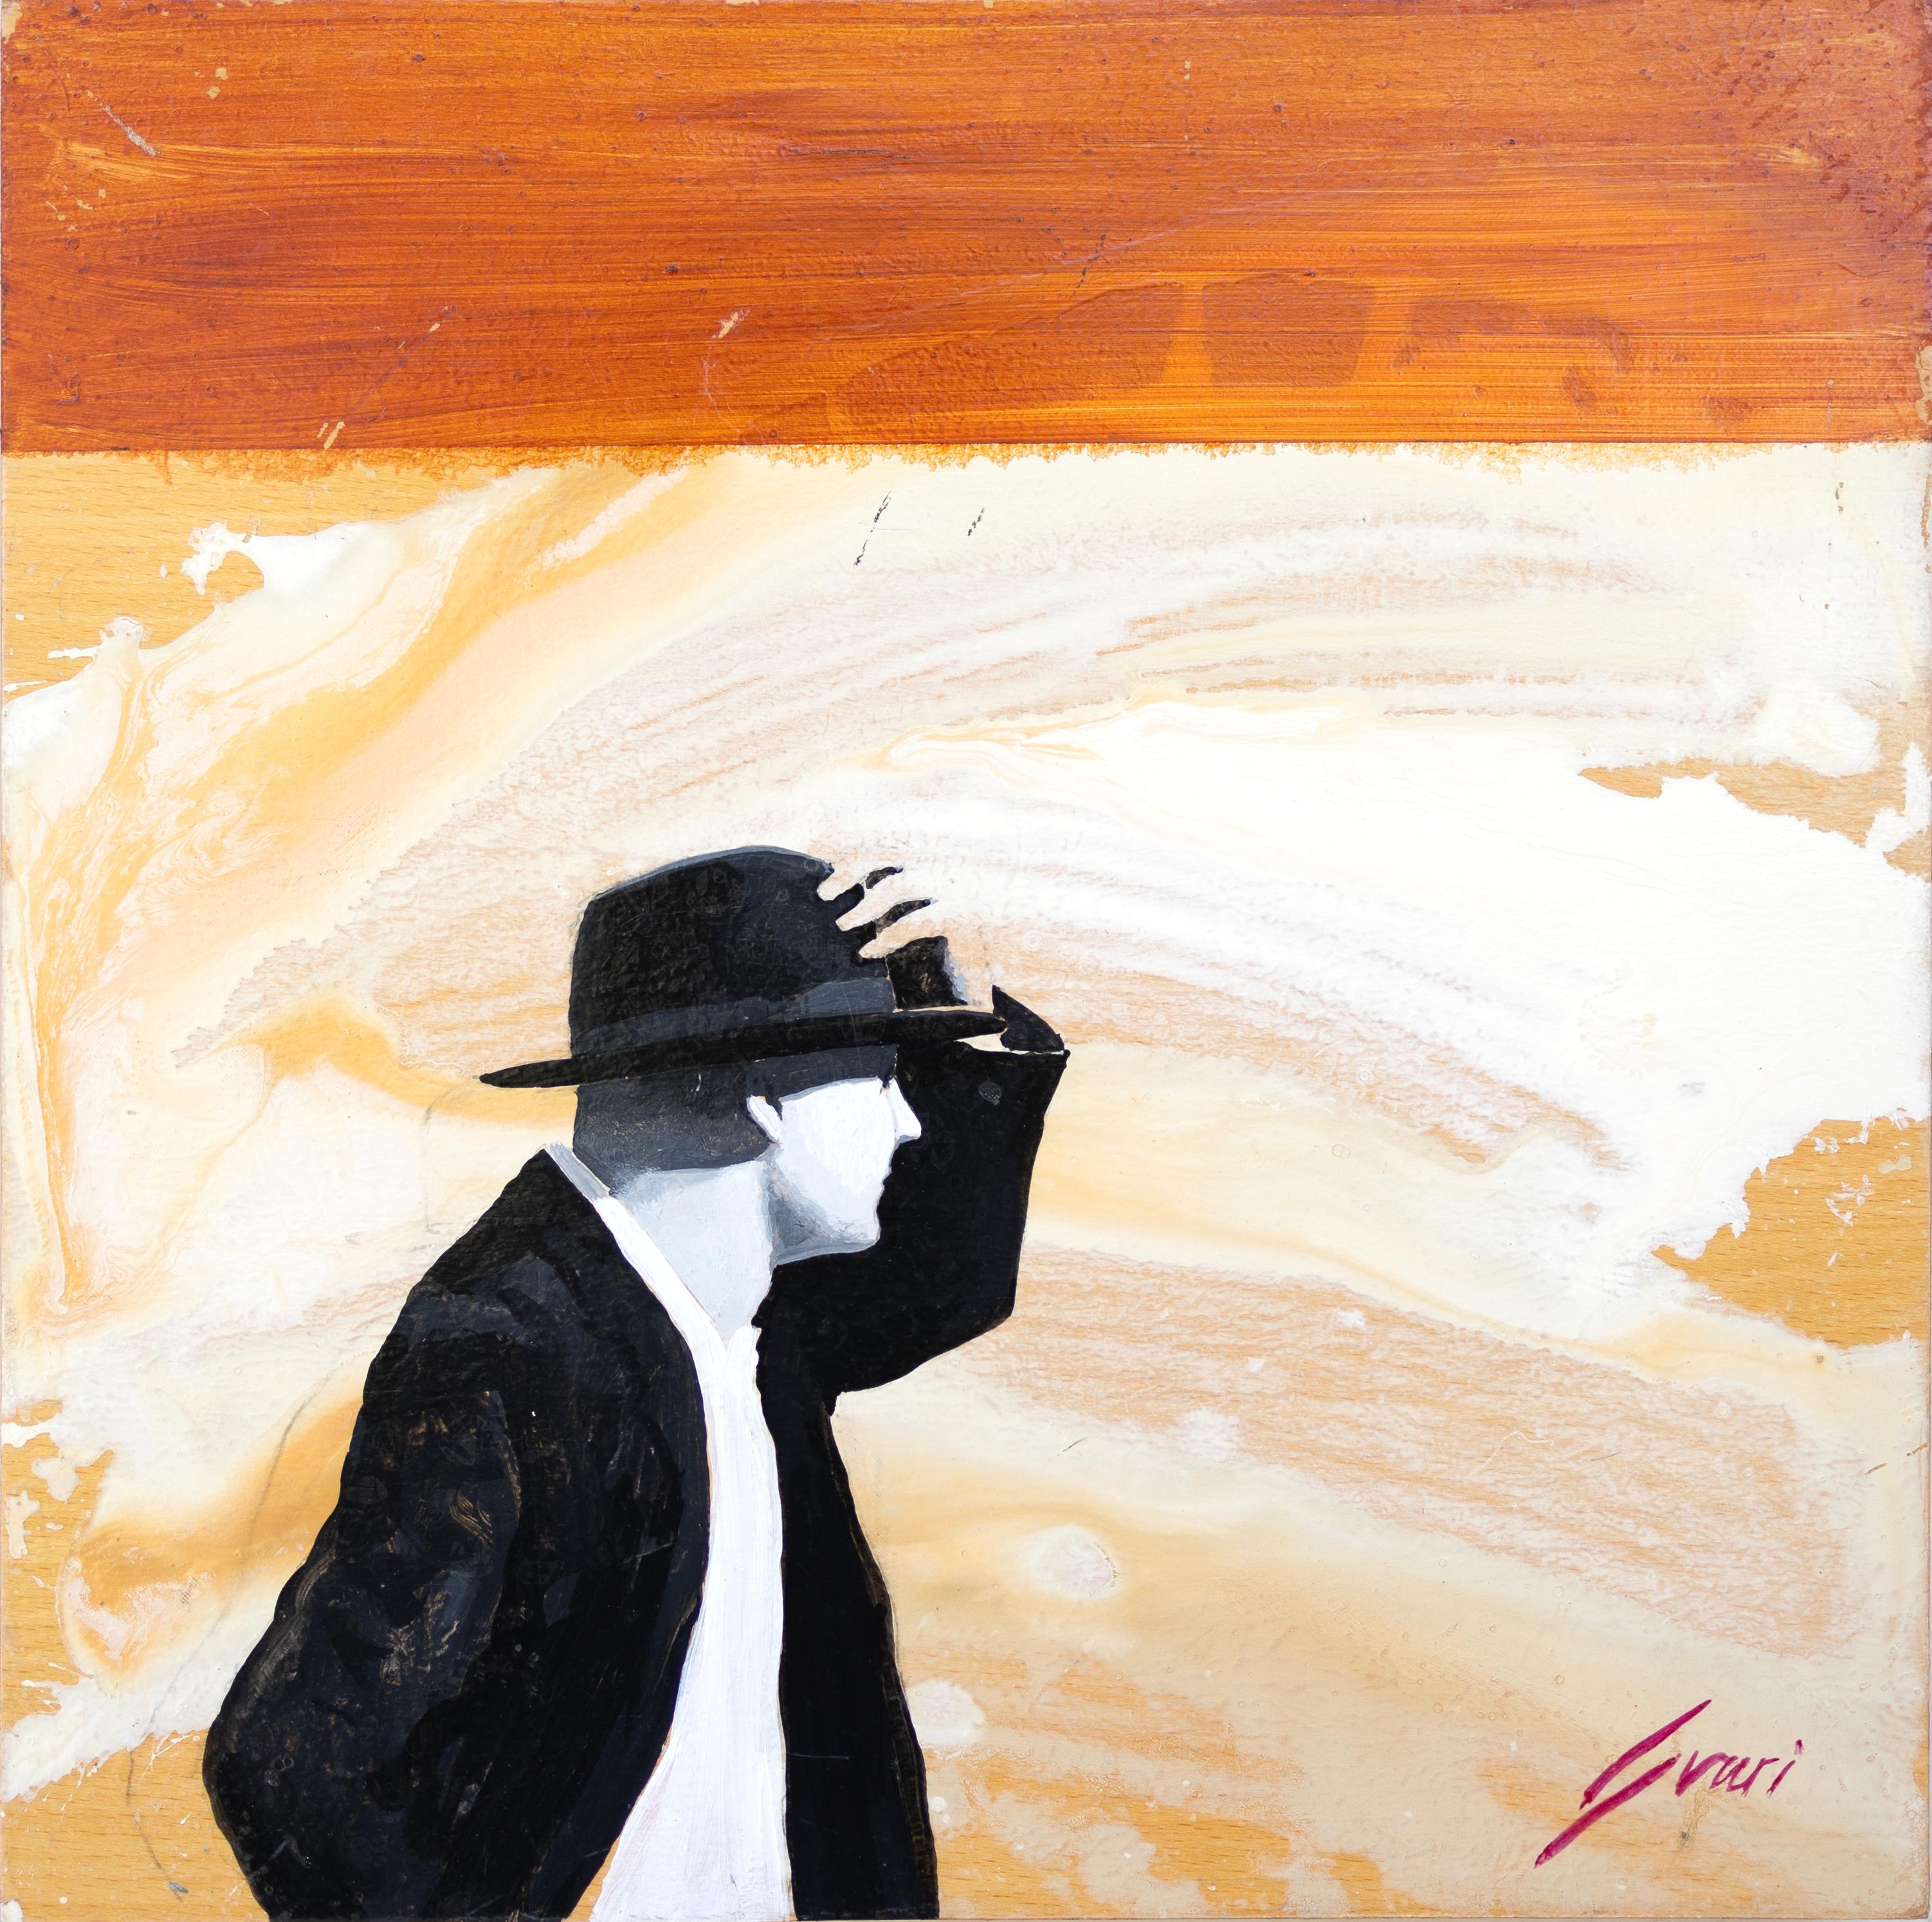 This expressionist piece by Majorcan artist Pep Suari depicts a man holding his hat in the wind with an orange background with white gestures.
12" x 12" - acrylic on canvas 